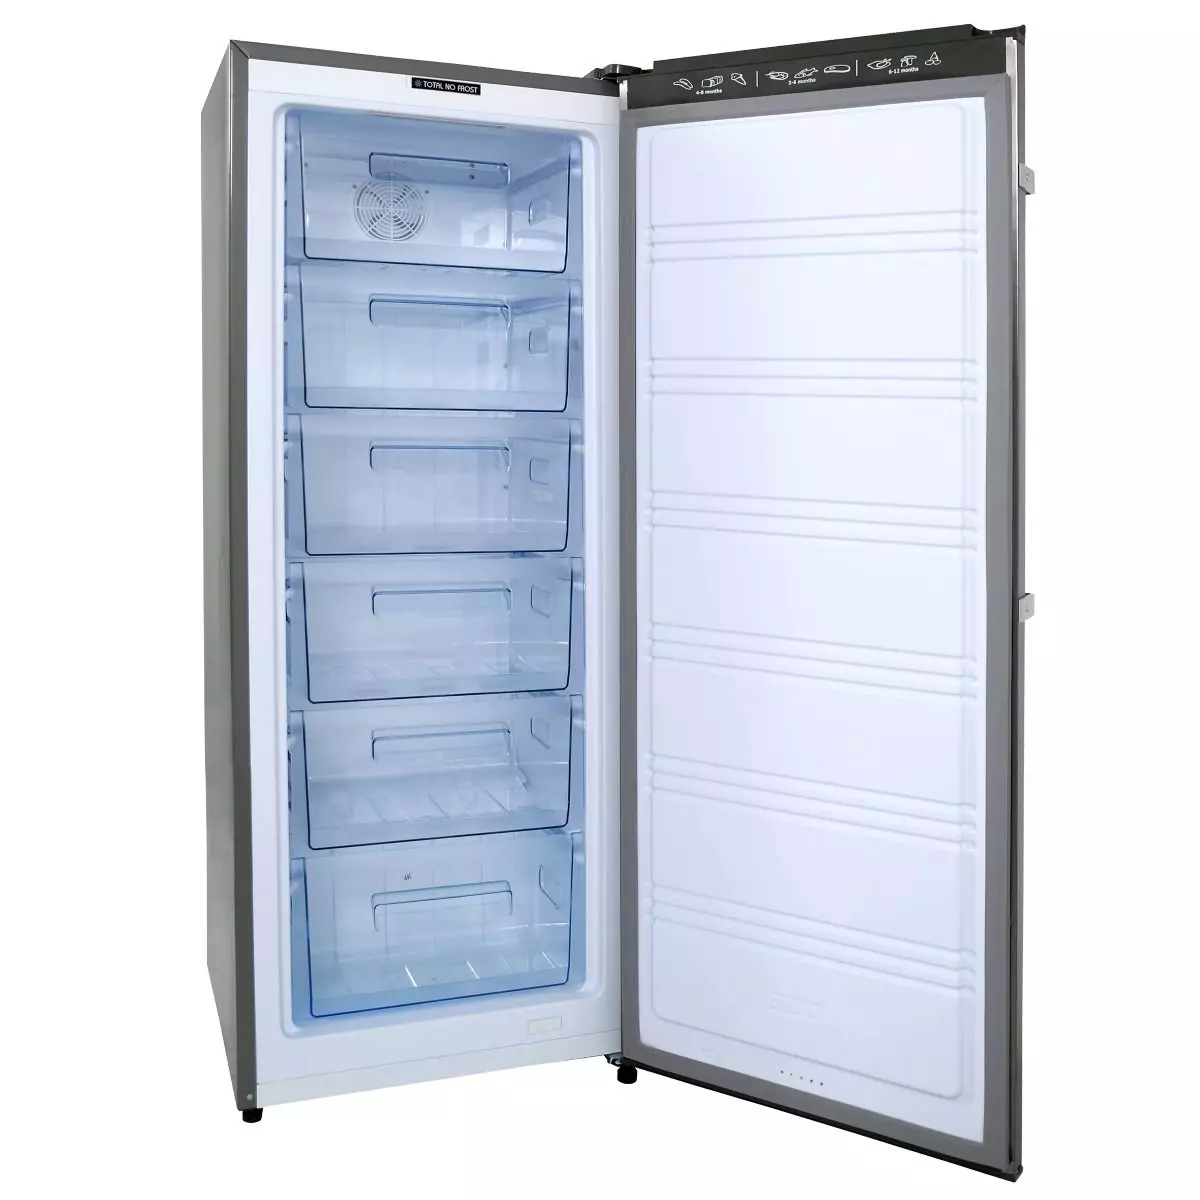 Fresh upright deep freezer, no frost, 6 drawers, digital touch screen, silver, FNU-MT270T